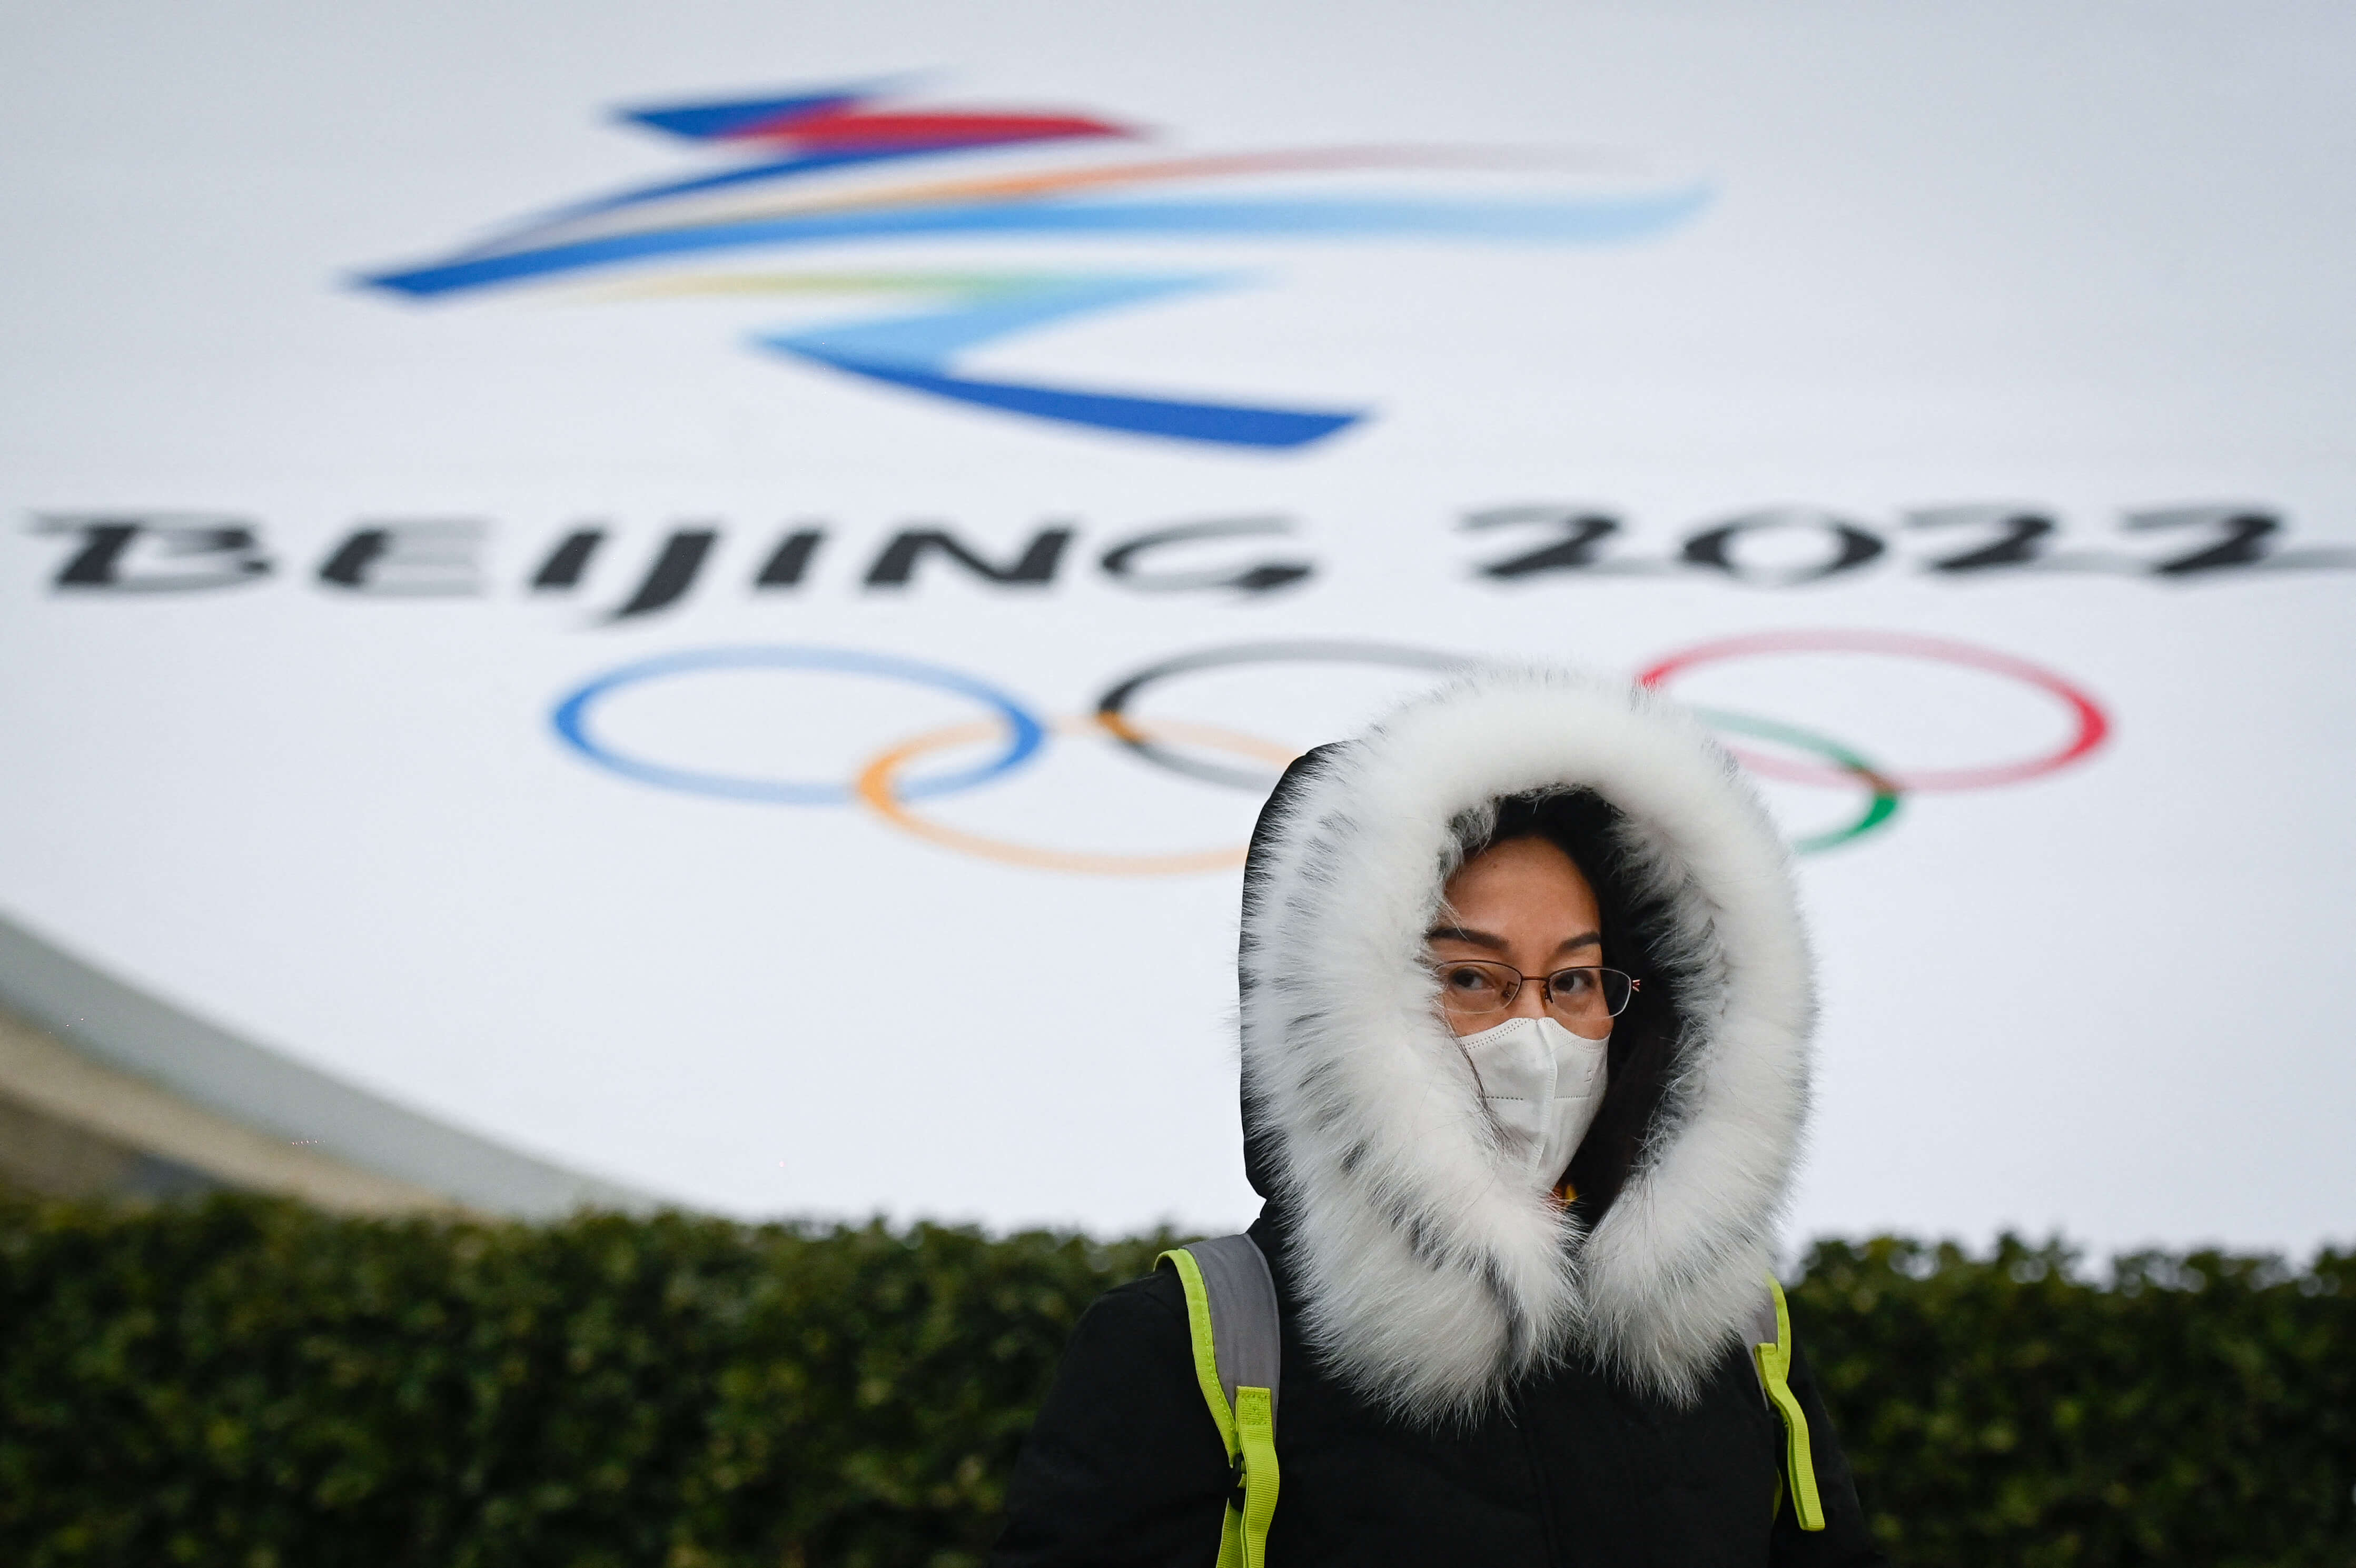 Omicron in China: Can students expect reopening delays ahead of Winter Olympics?